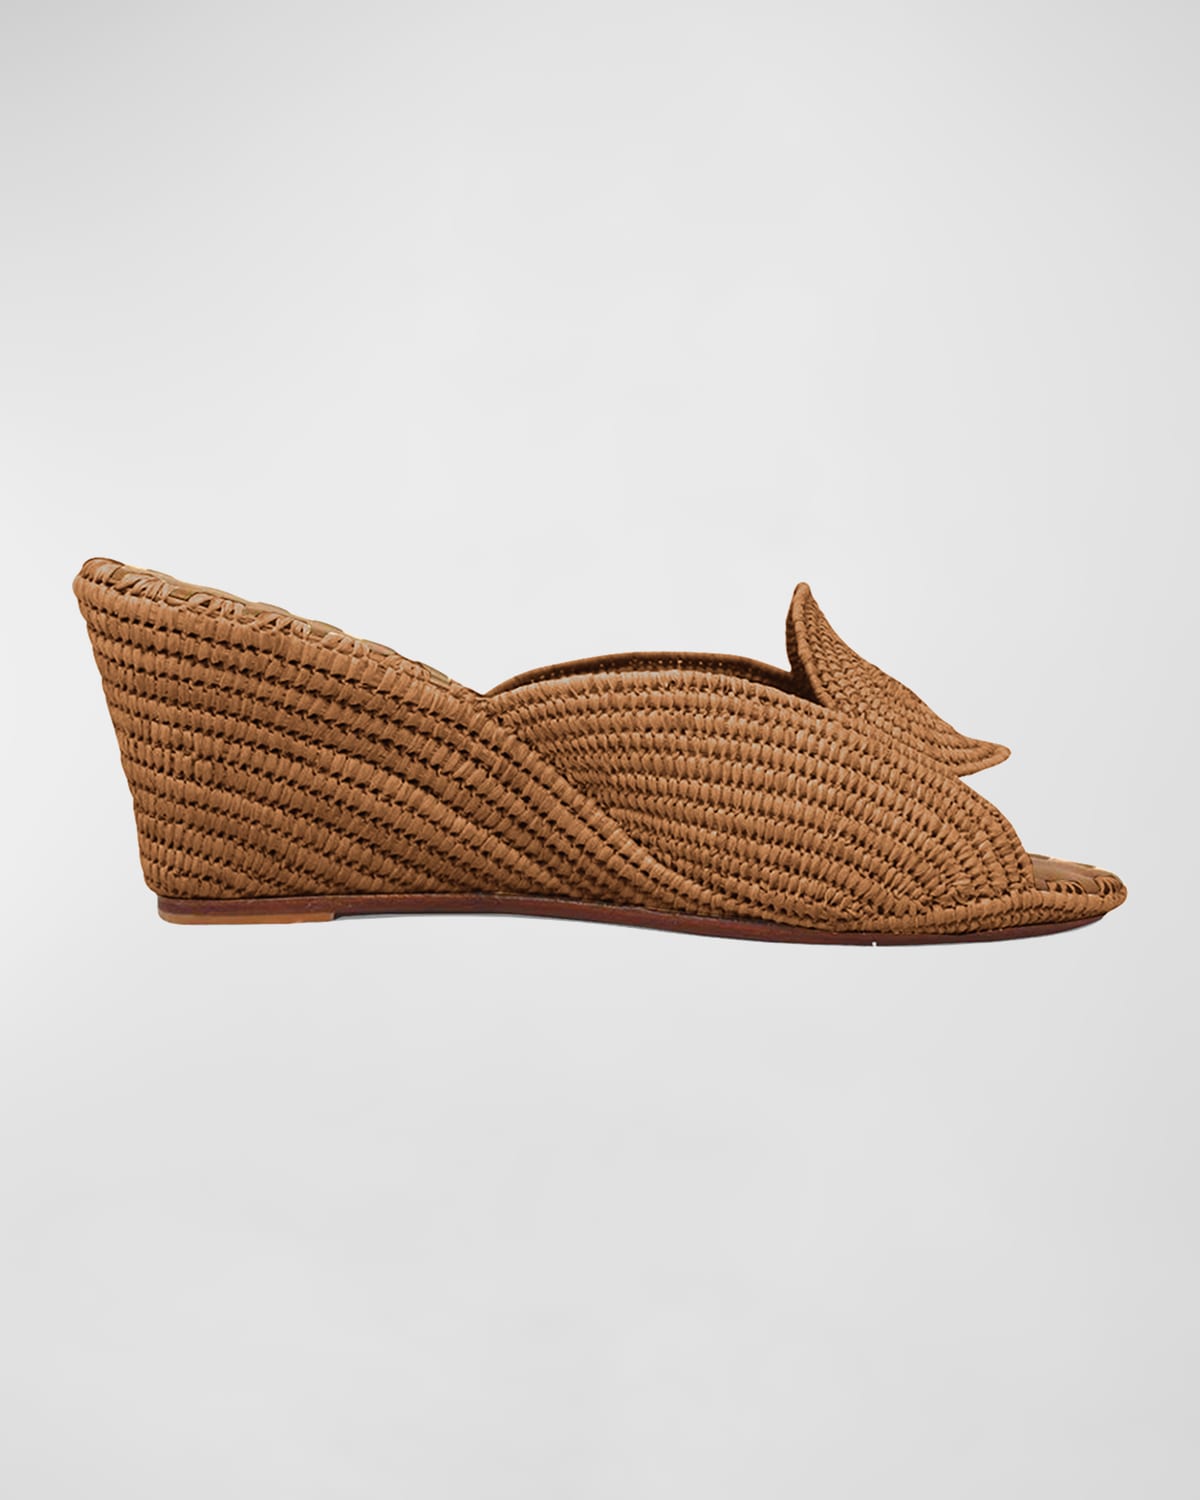 Carrie Forbes Etre Raffia Wedge Sandals In Cognac